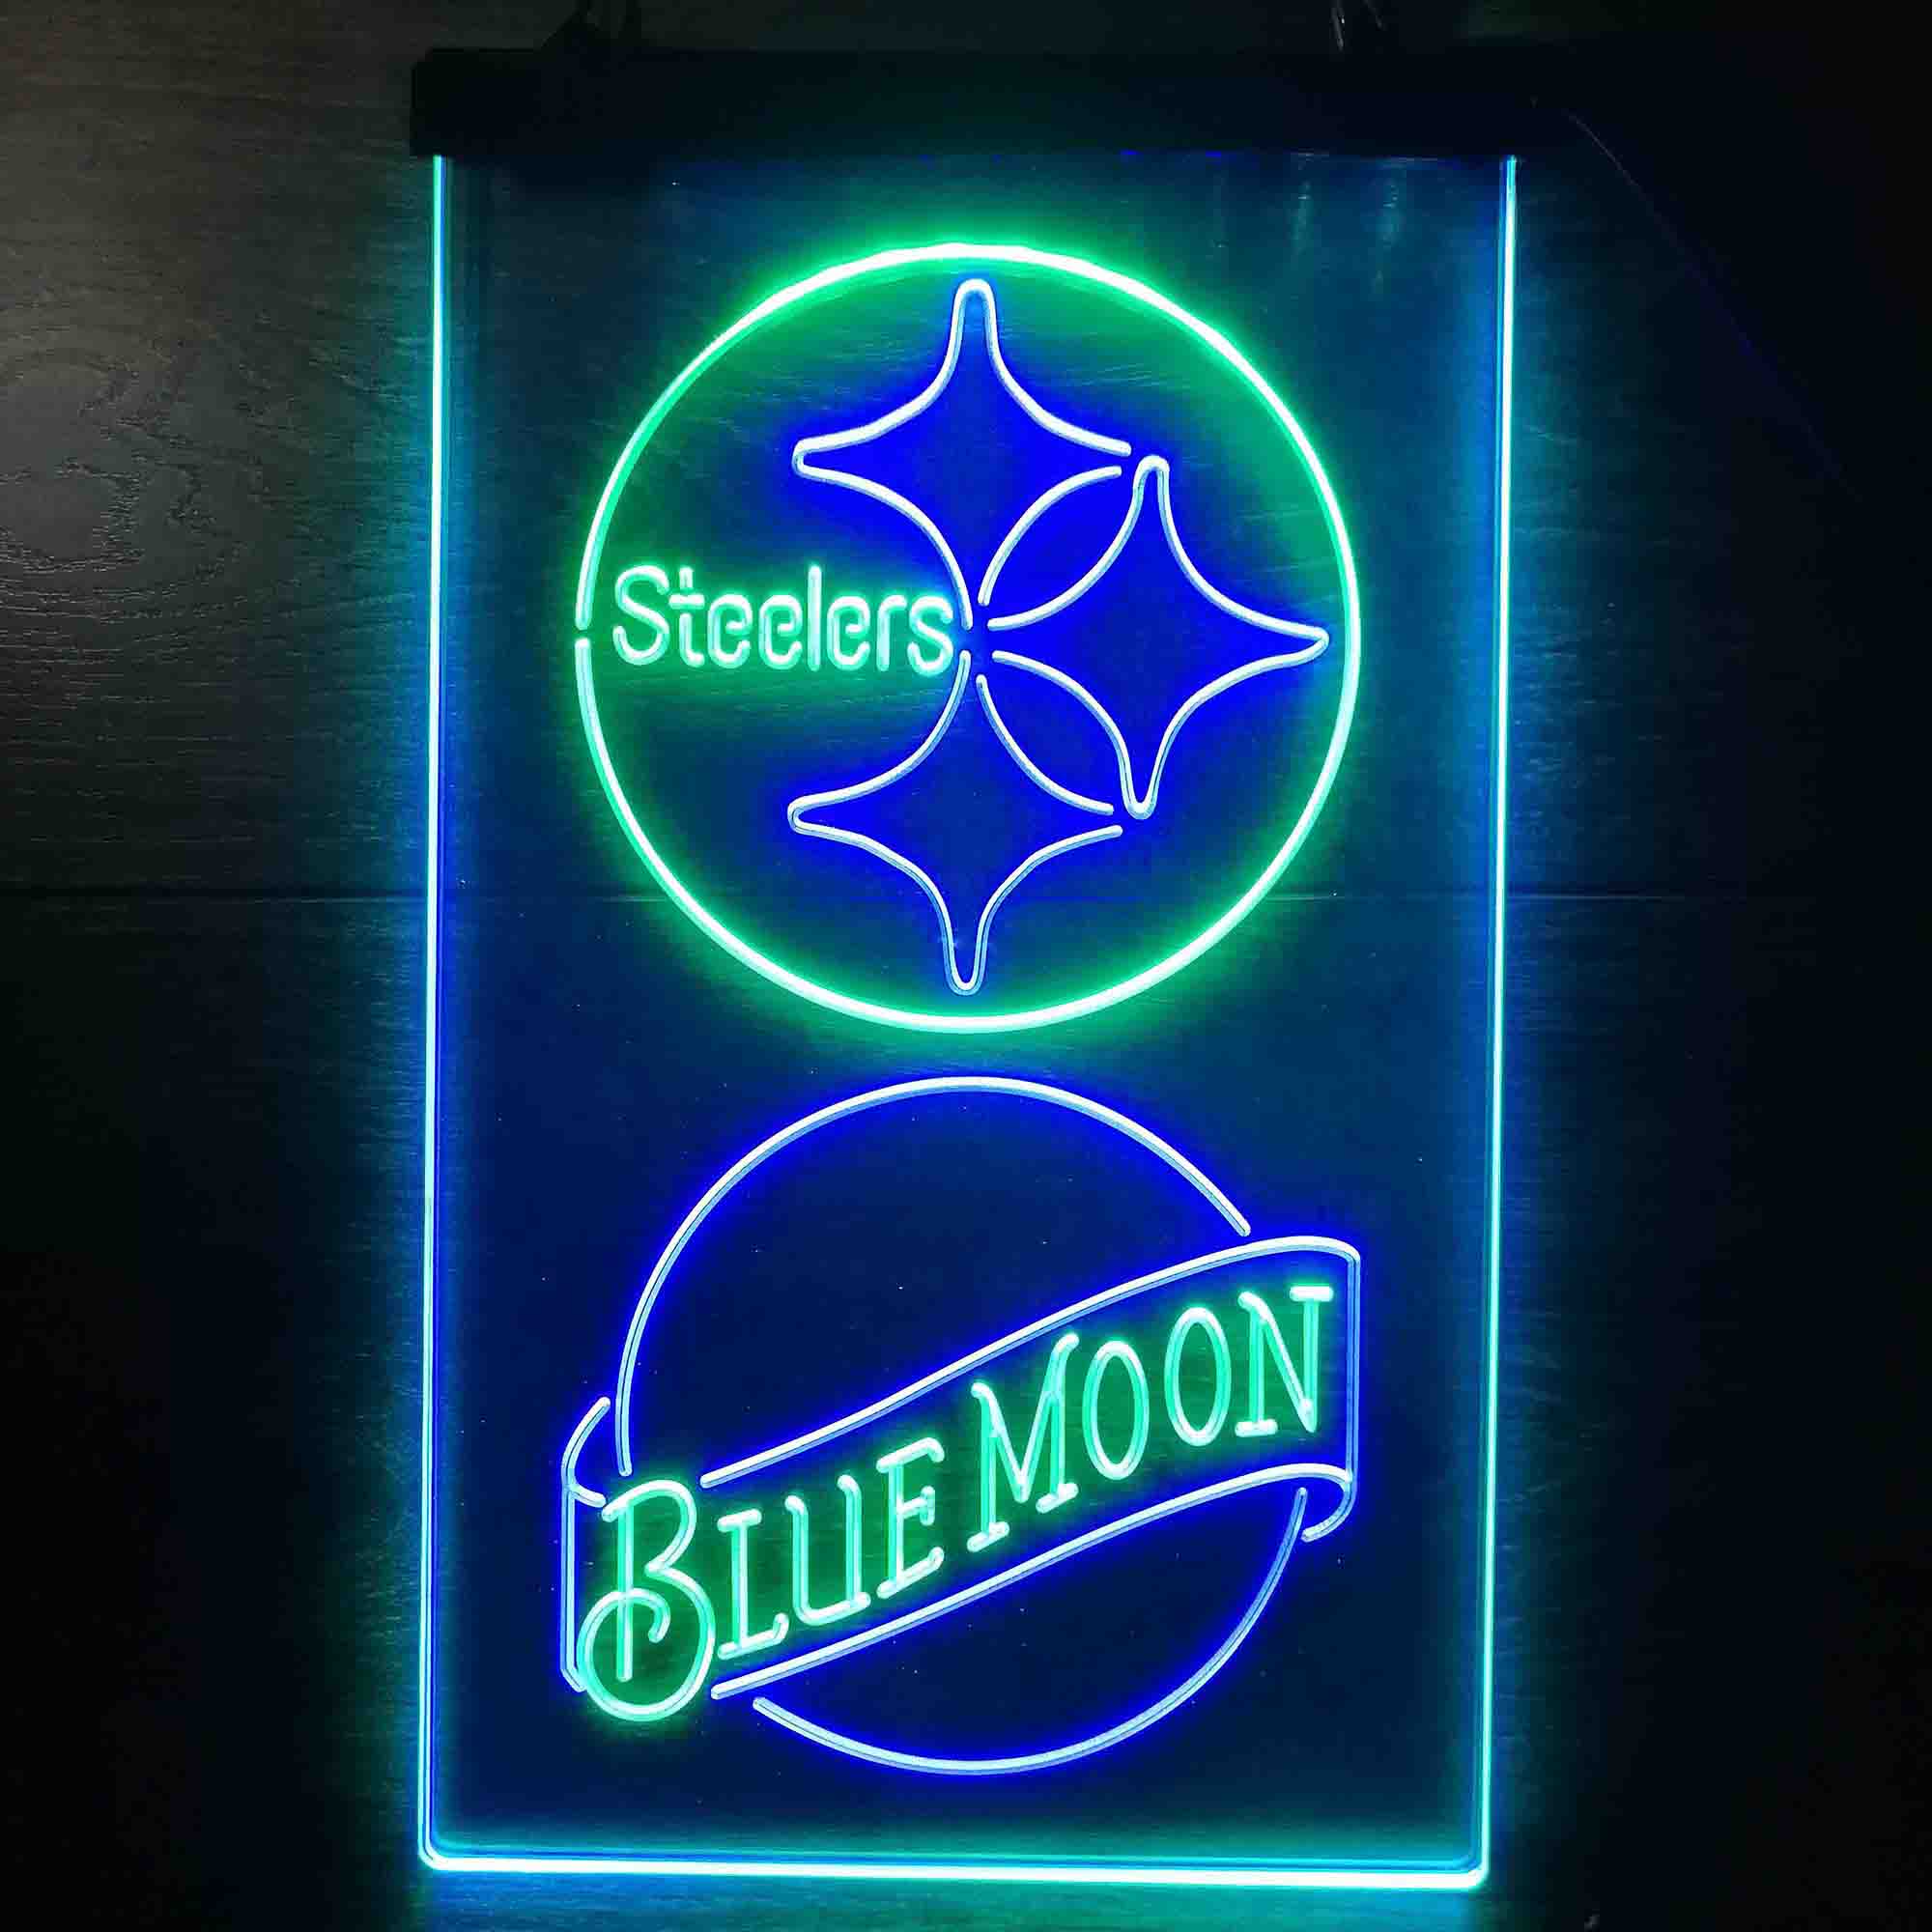 Blue Moon Bar Pittsburgh Steelers Est. 1933 LED Neon Sign